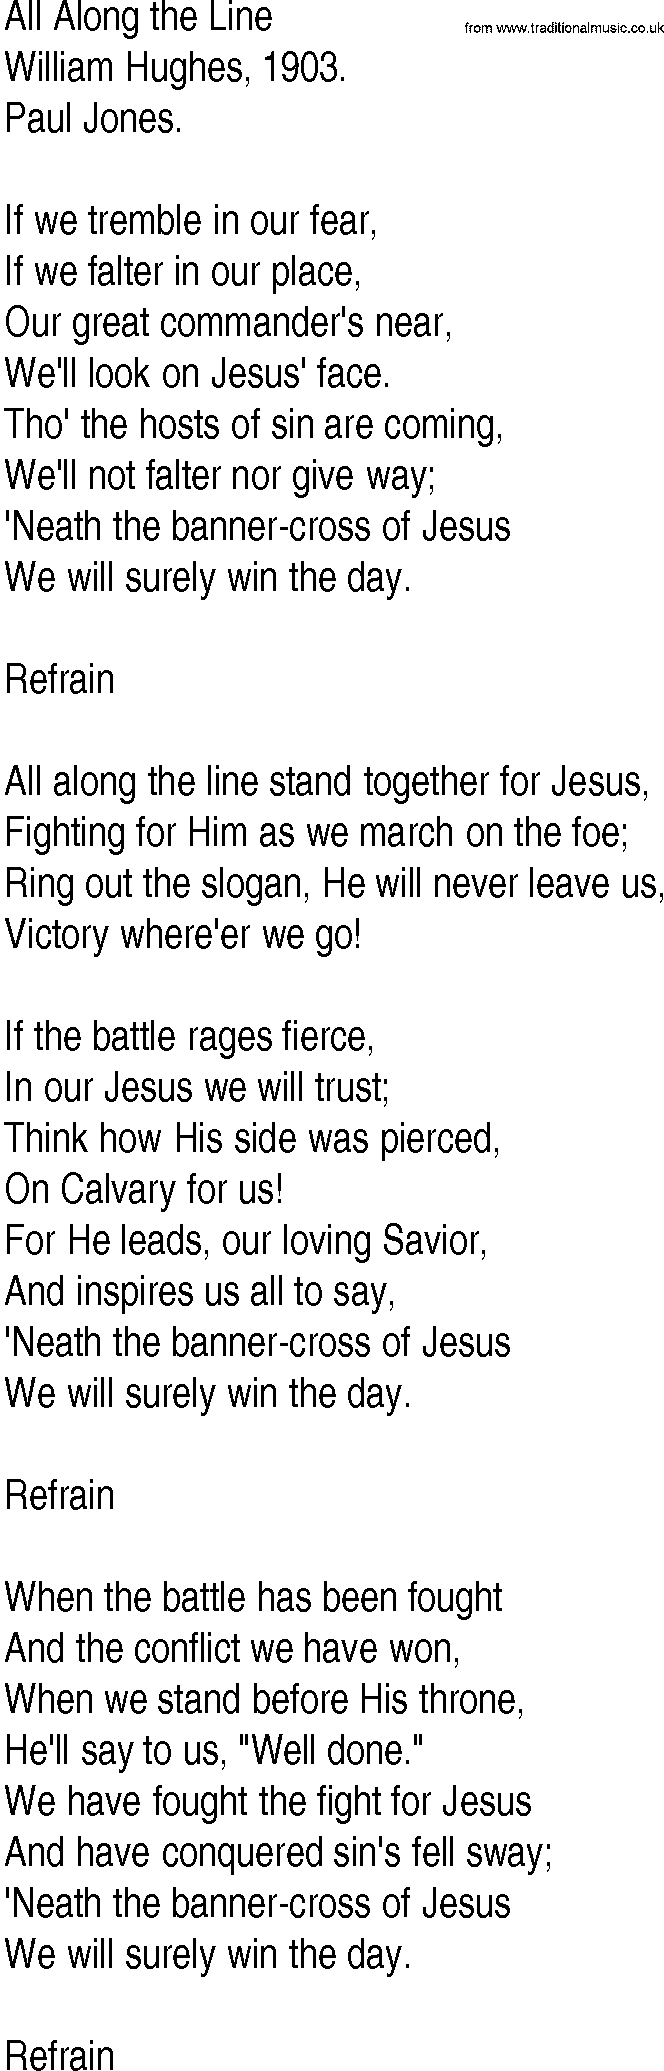 Hymn and Gospel Song: All Along the Line by William Hughes lyrics